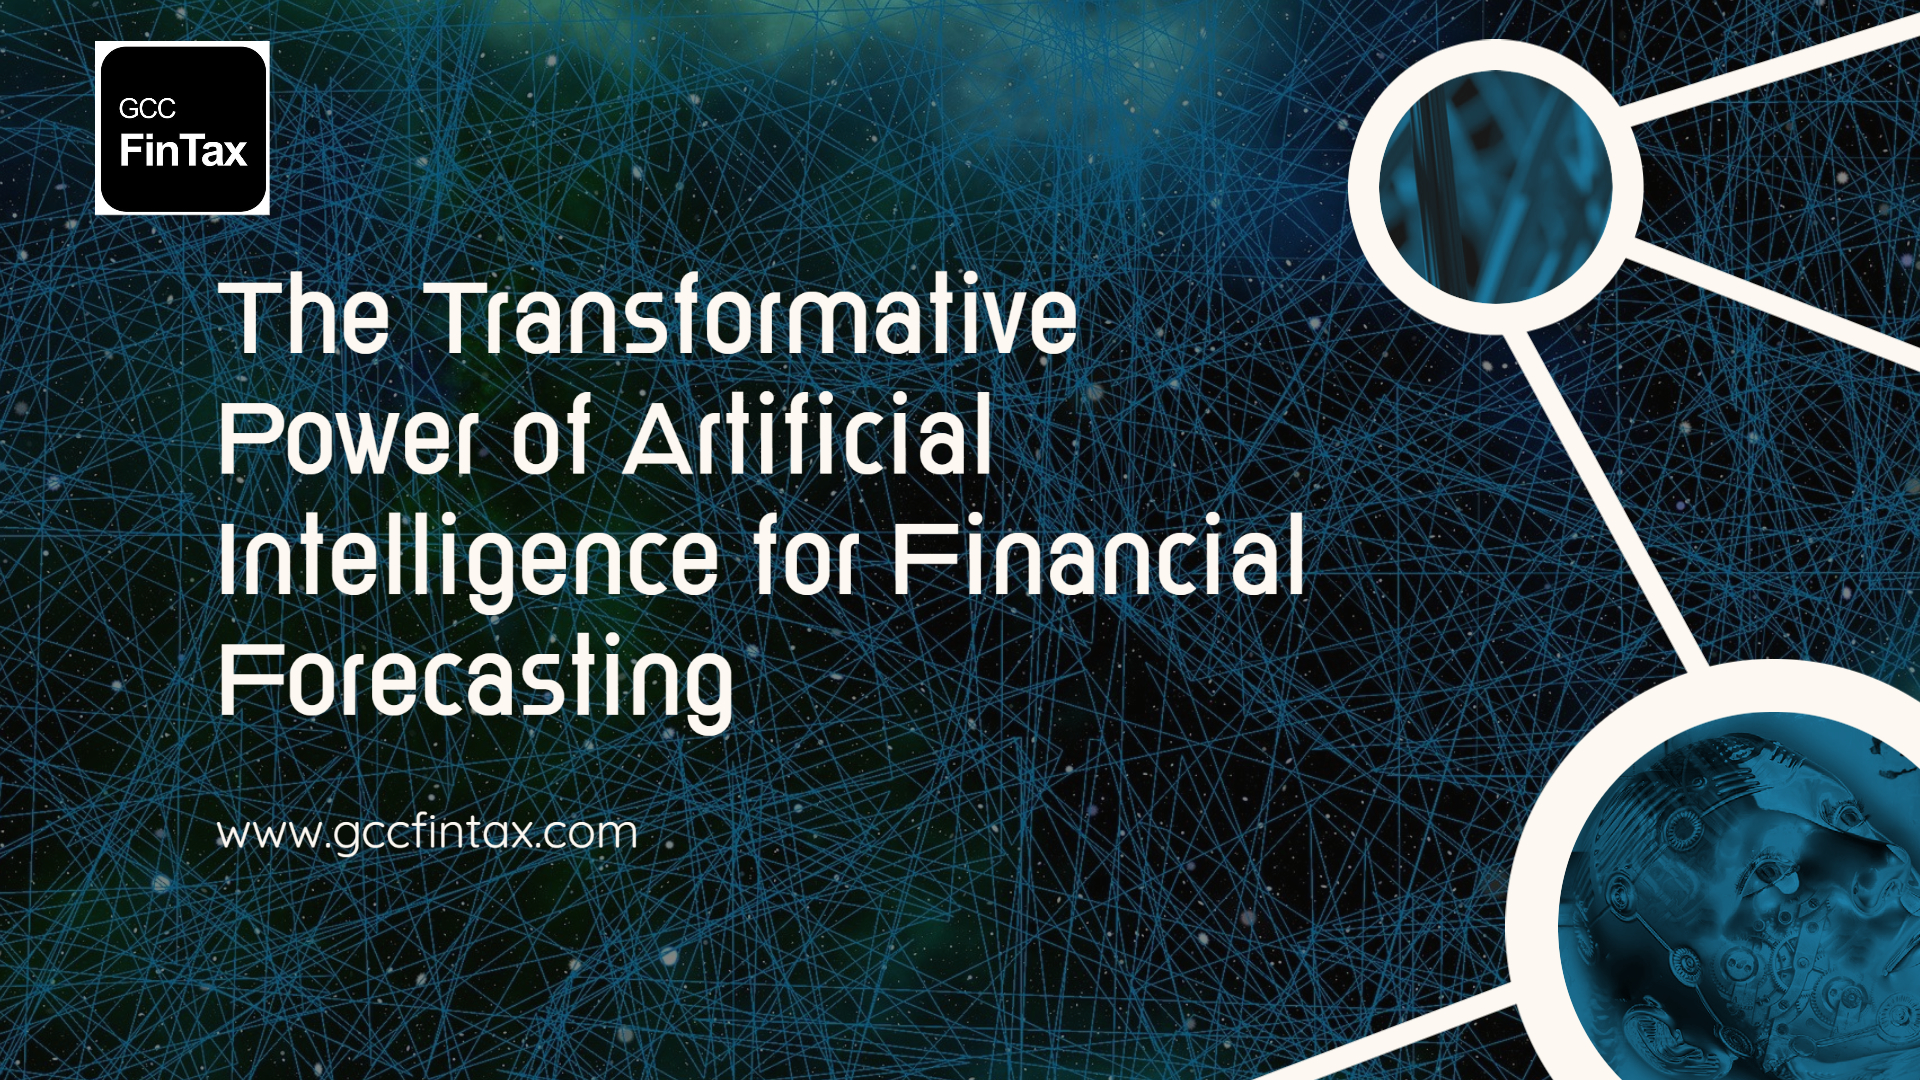 The Transformative Power of Artificial Intelligence for Financial Forecasting